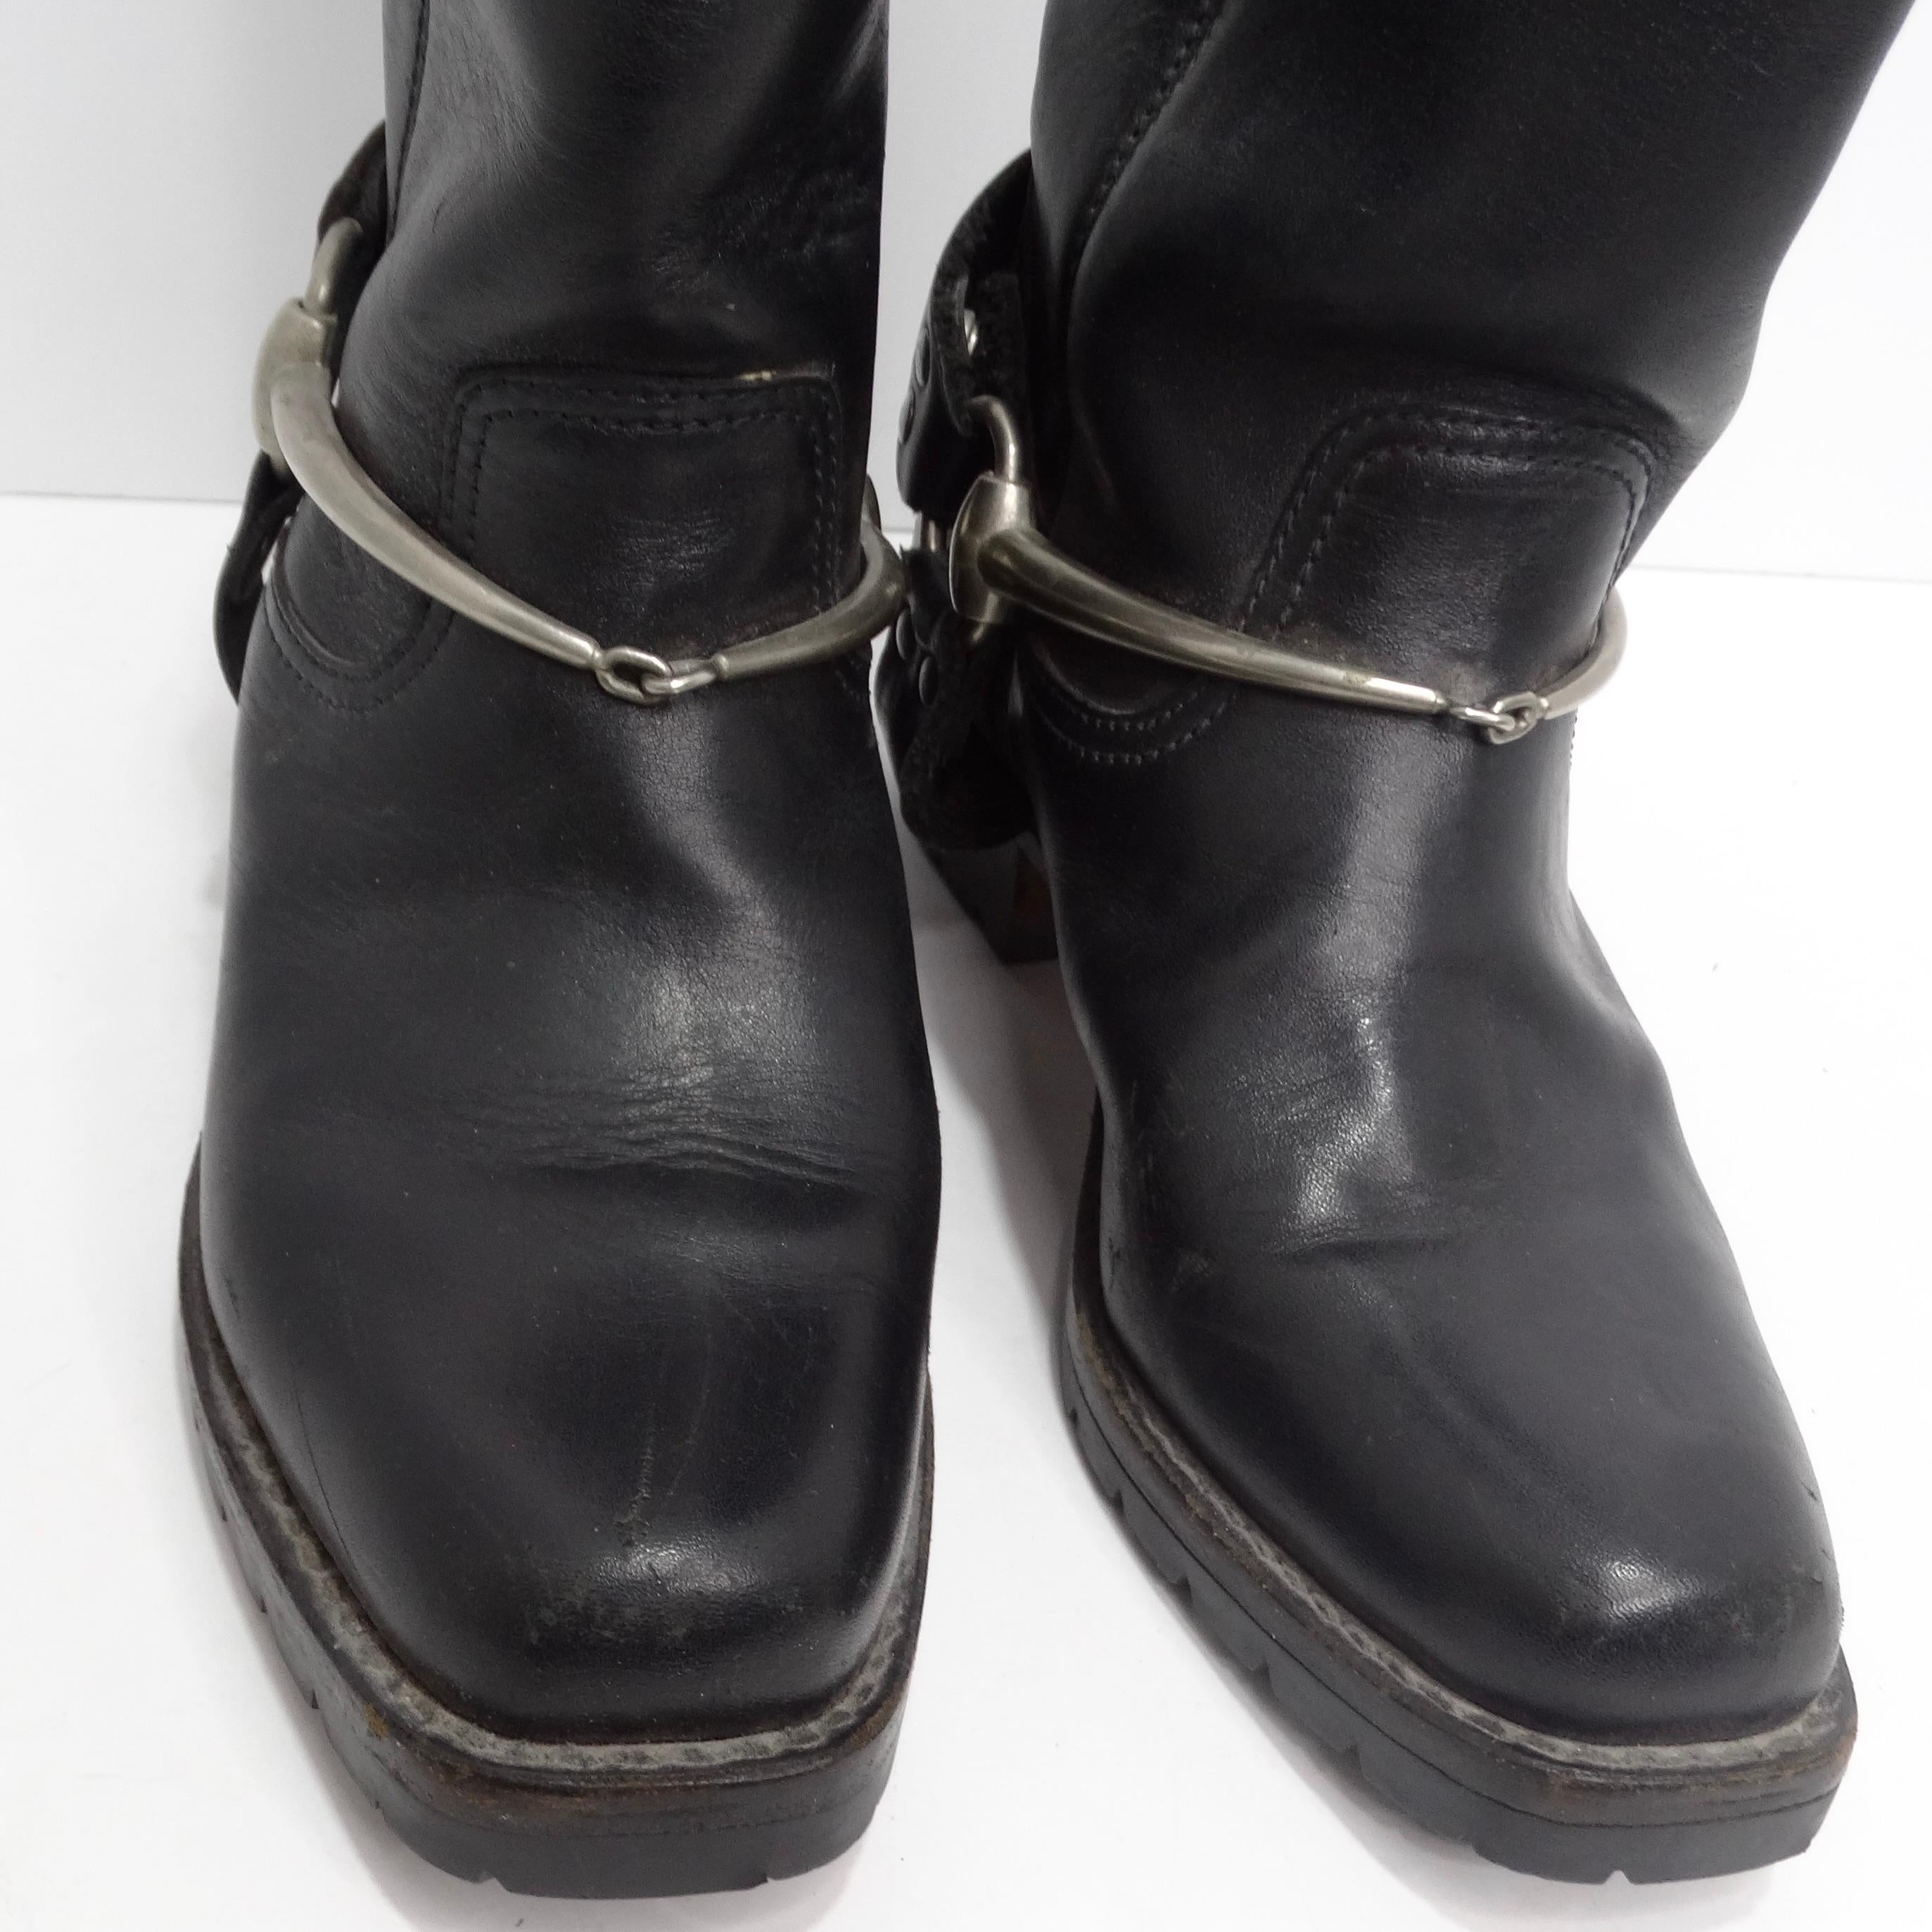 Gucci Black Leather Vintage Motorcycle Boots In Good Condition For Sale In Scottsdale, AZ